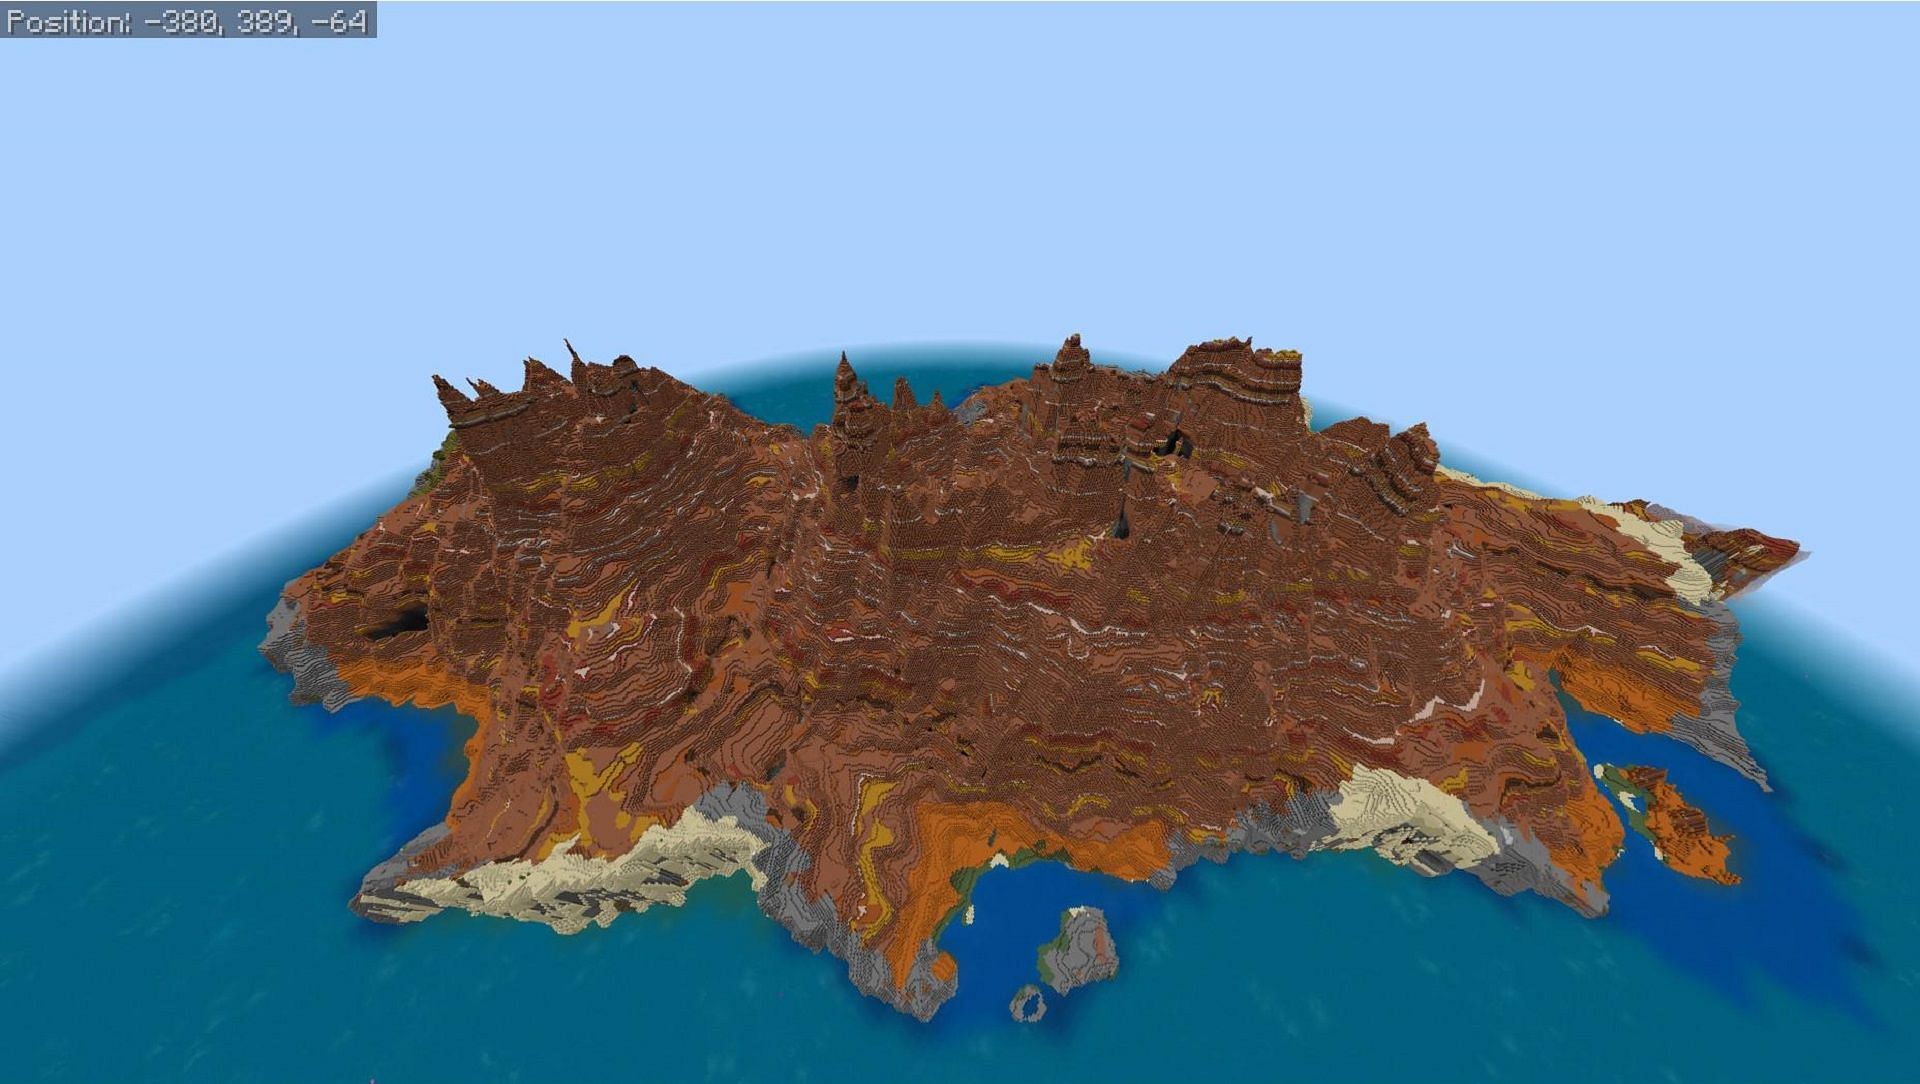 This island seed might be inhospitable, but some Minecraft fans might see it as a challenge (Image via Fragrant_Result_186/Reddit)